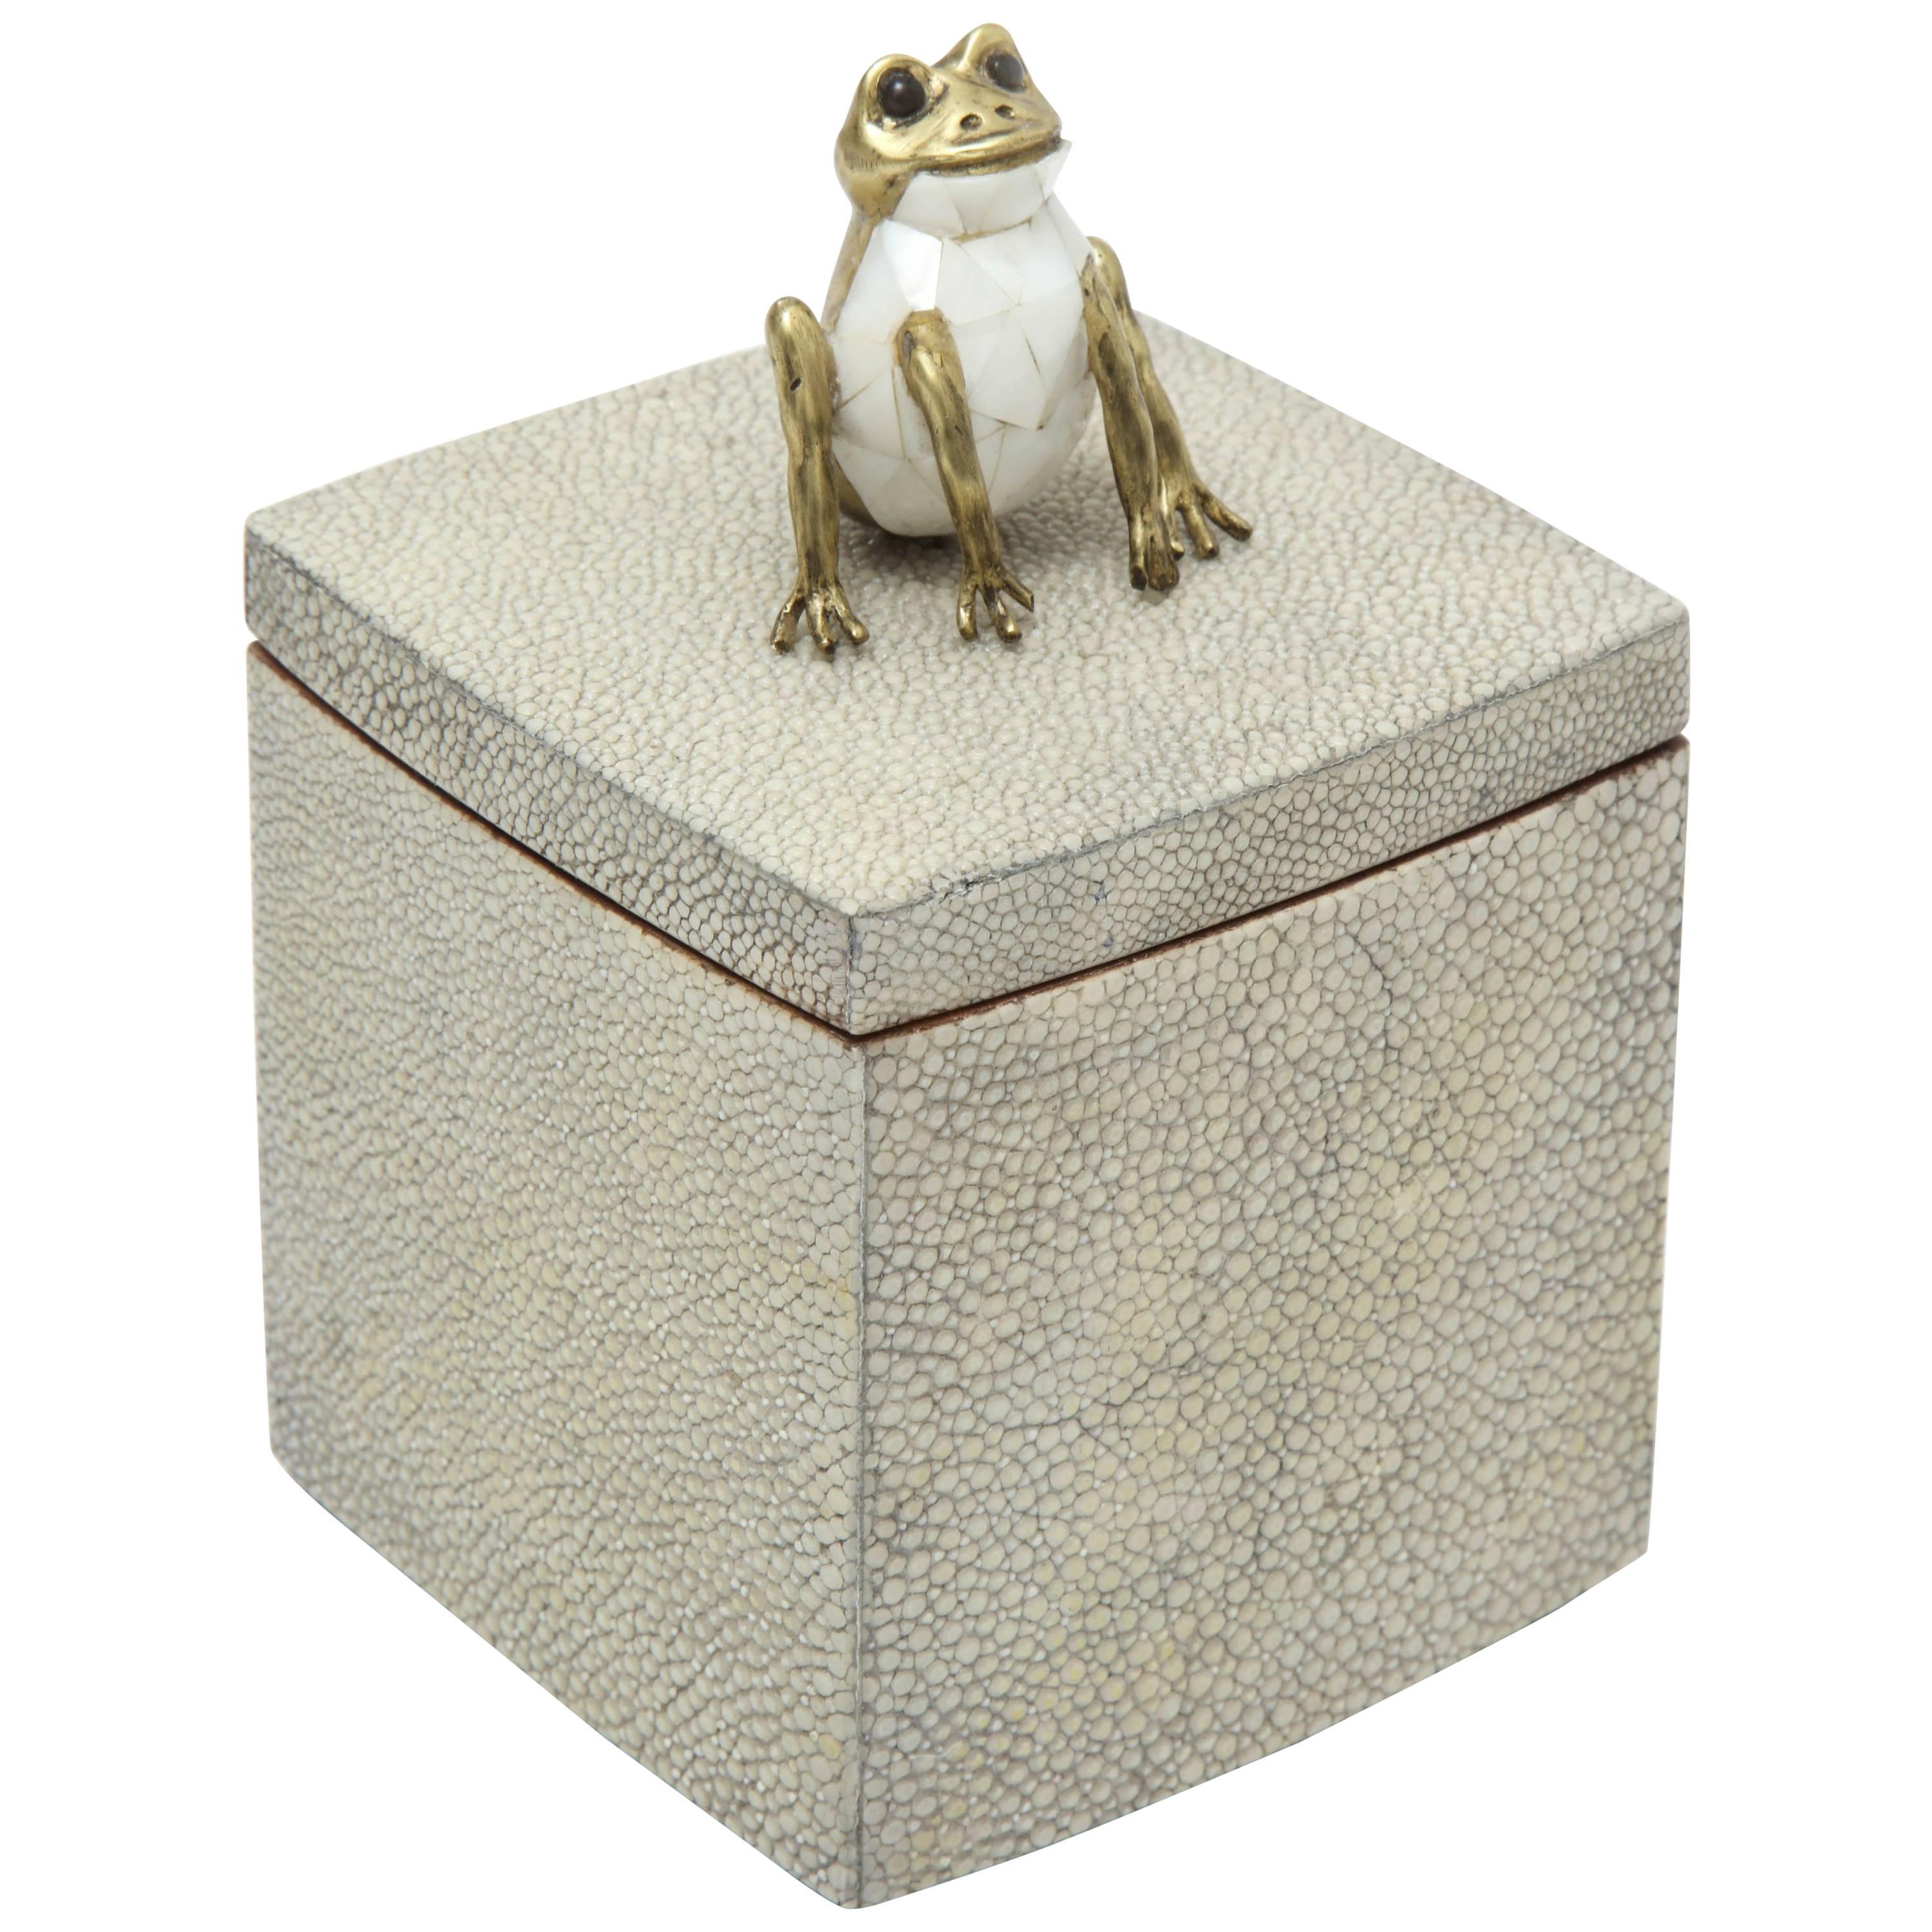 Shagreen Box with Decorative Frog 